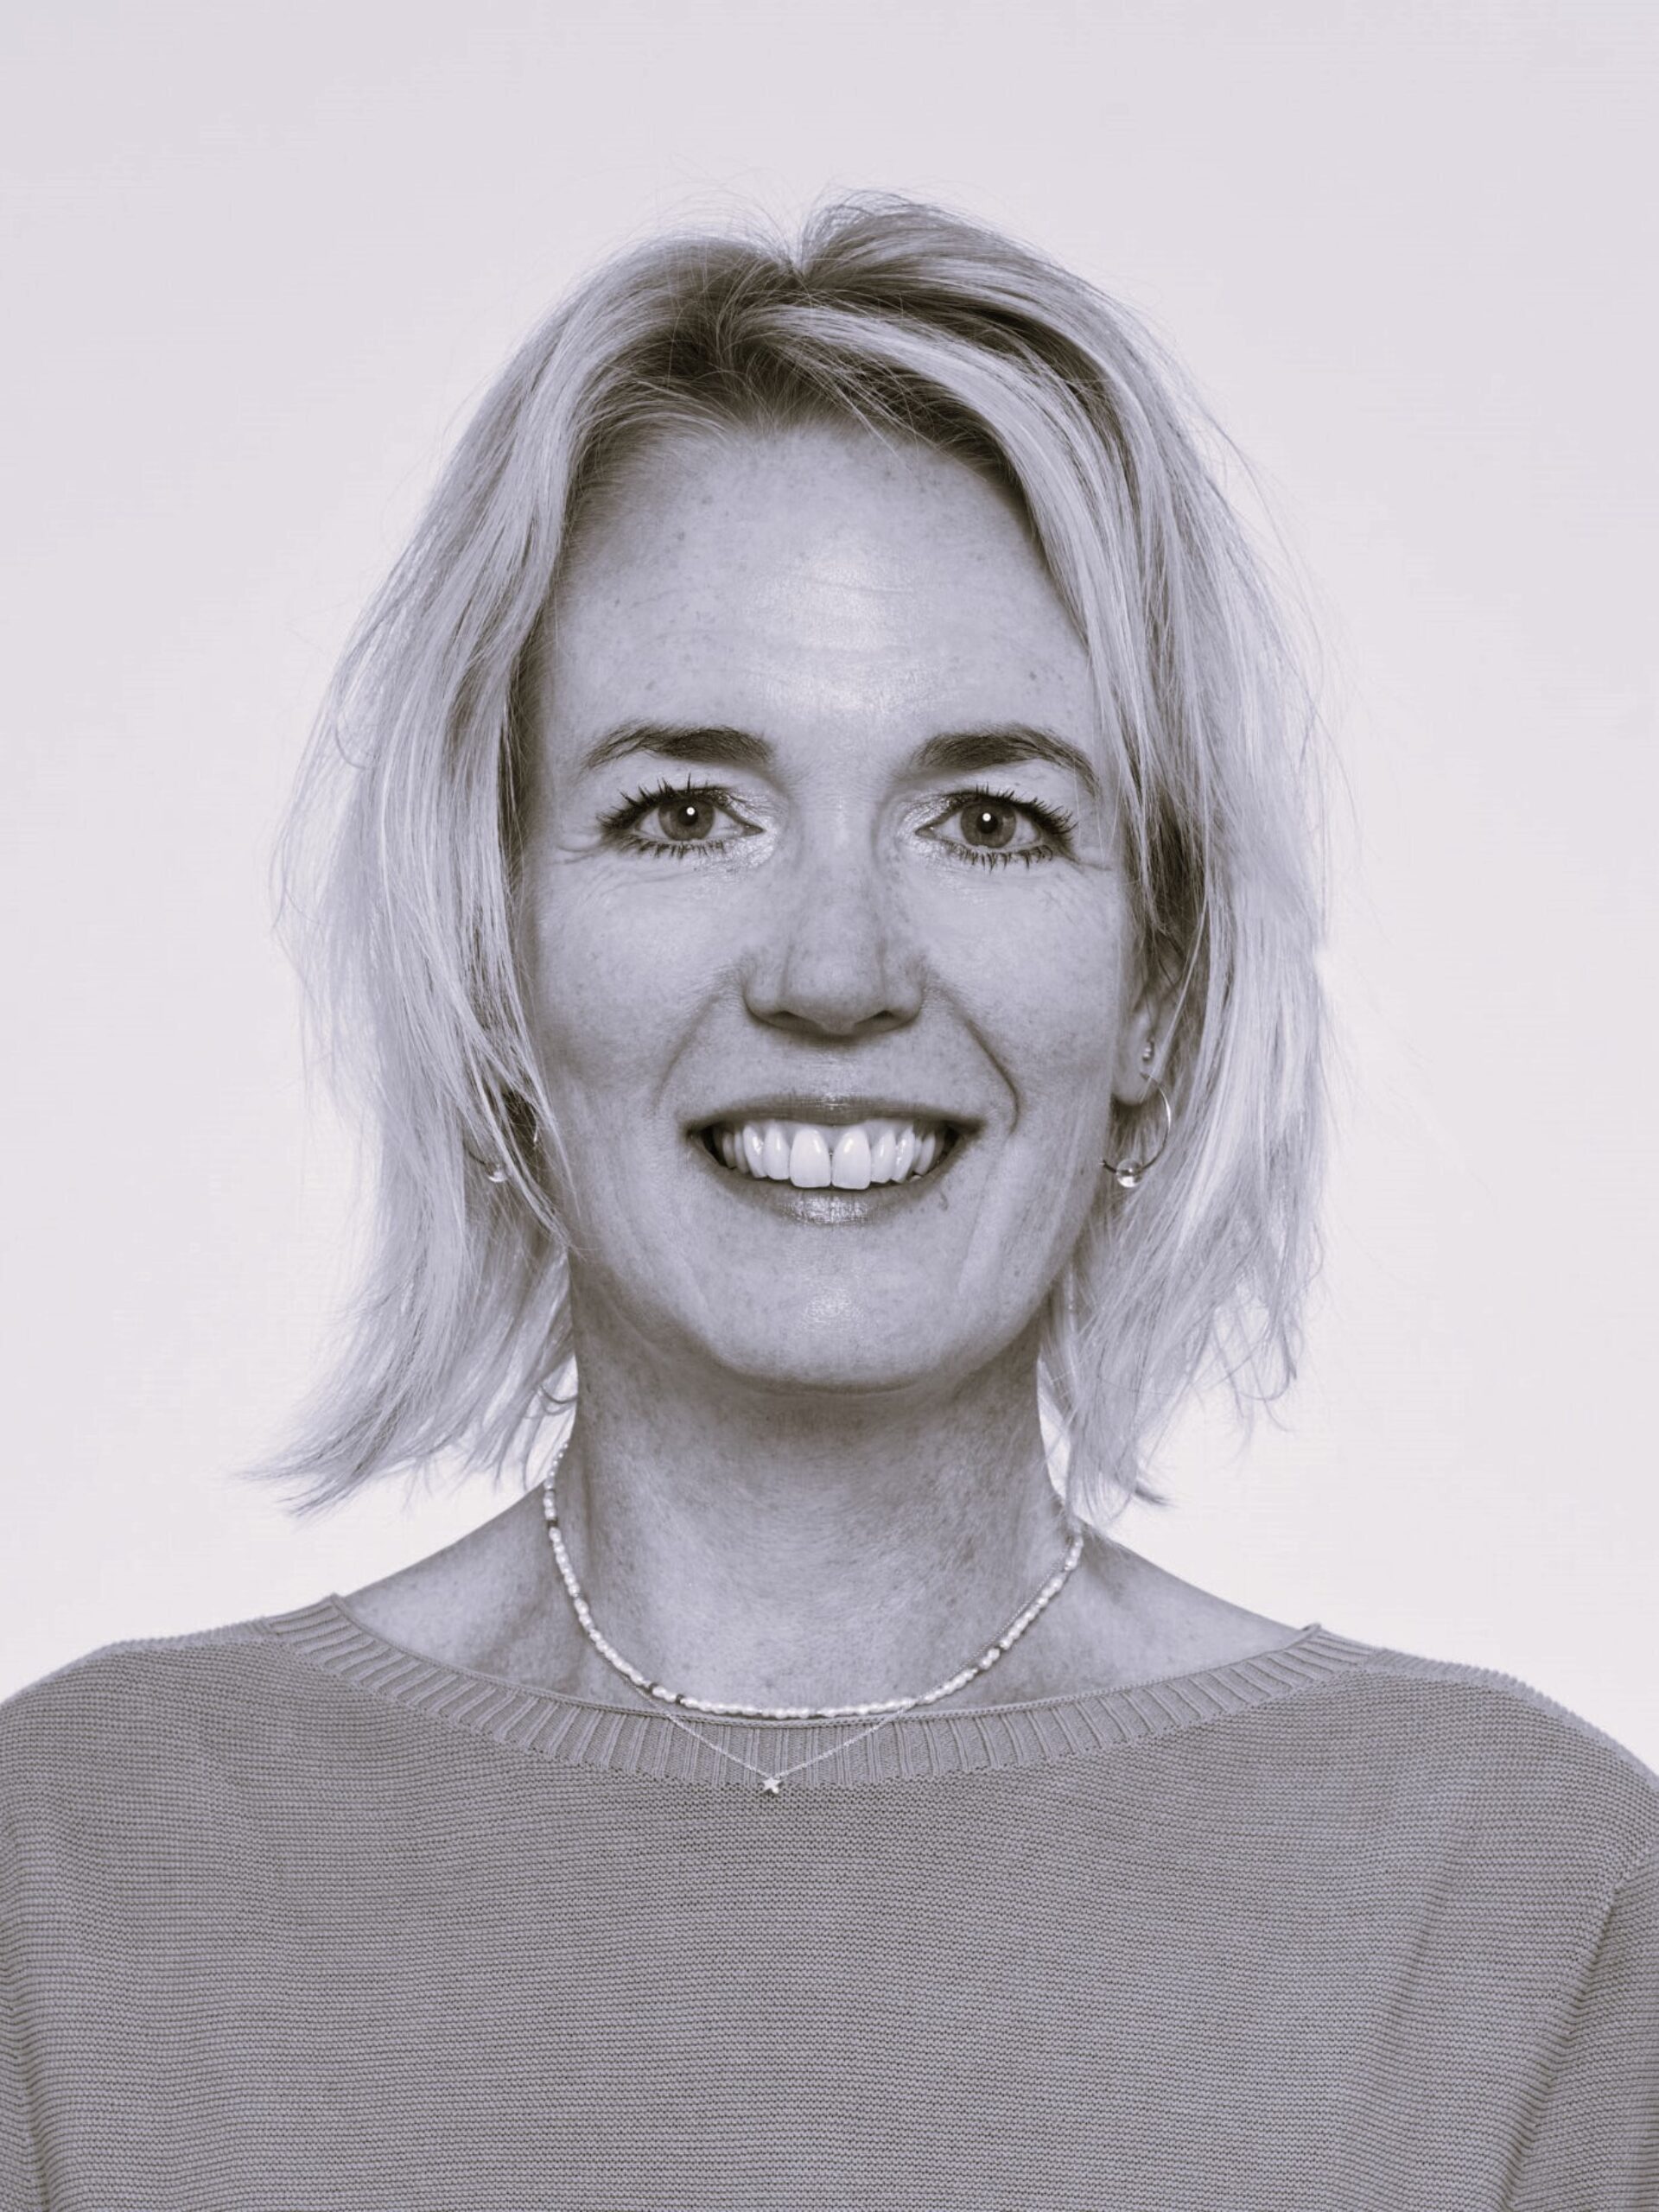 December 2023 - Anne Hoogstraten joins SentryX as Chief People Officer